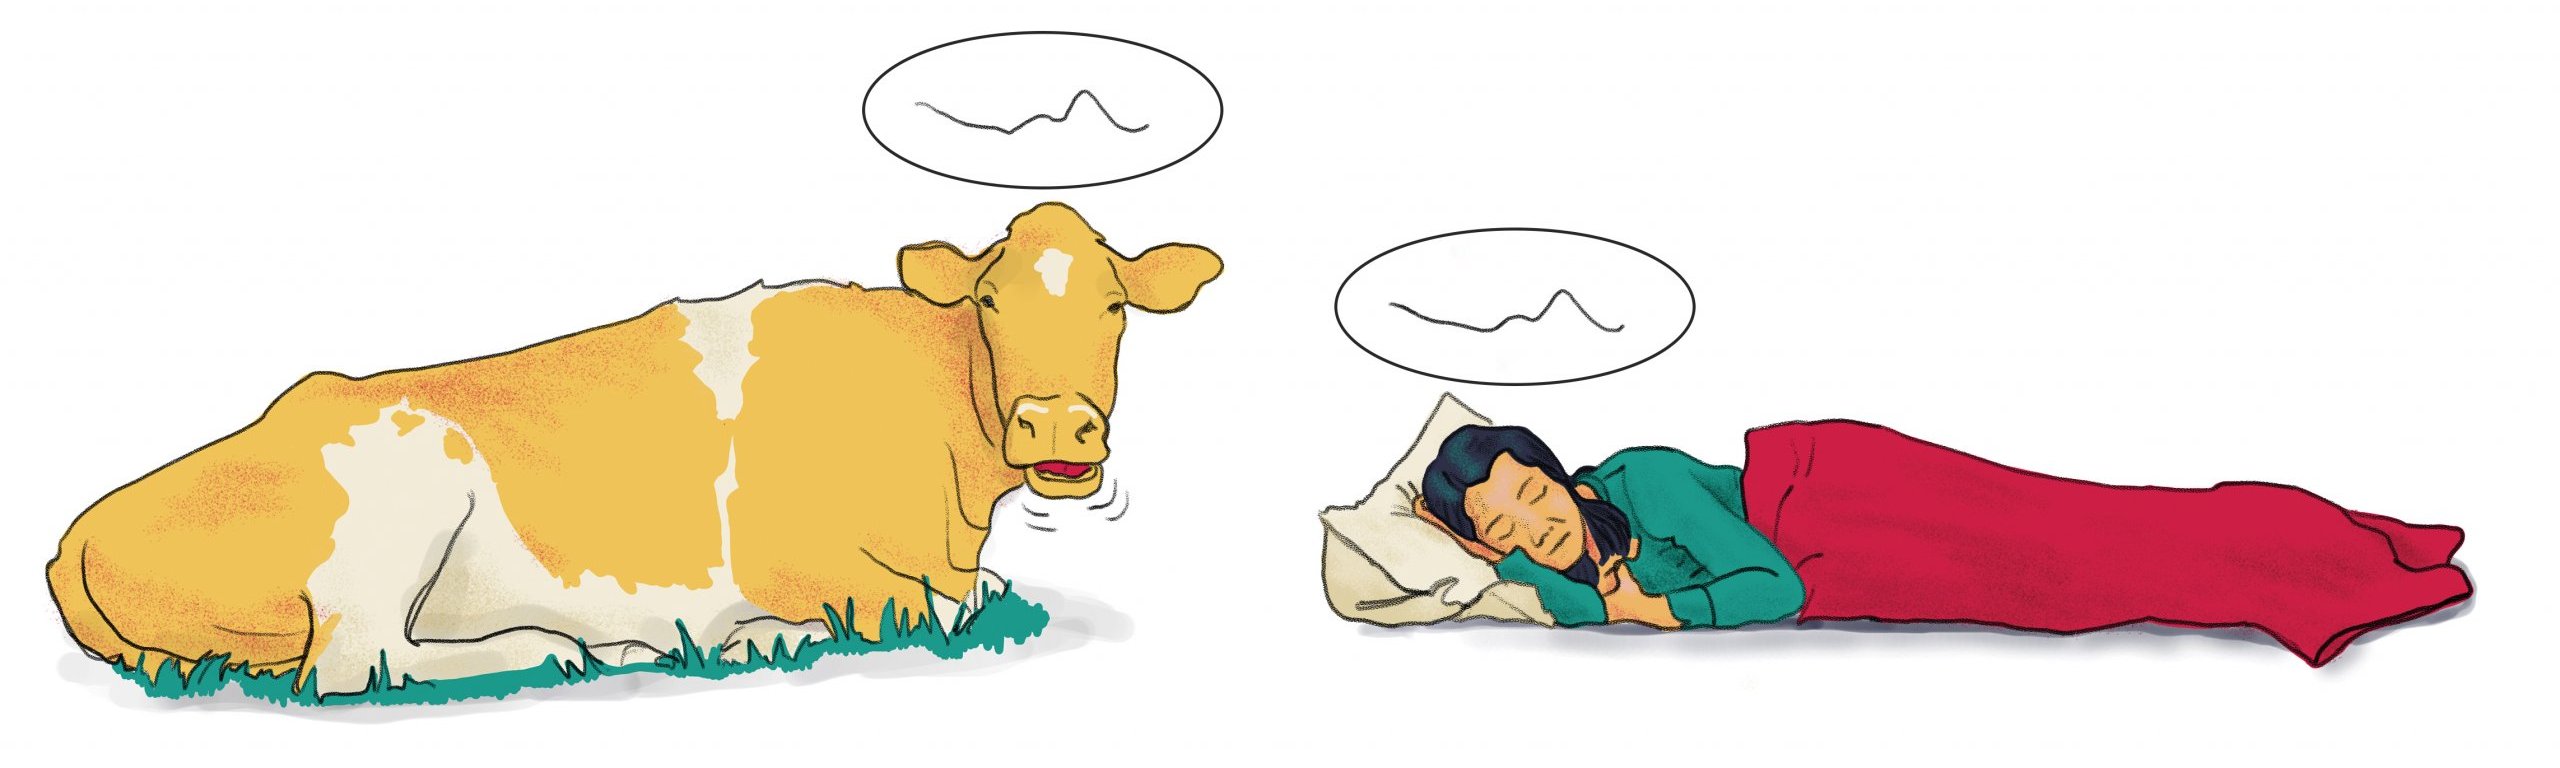 Illustration of cow and woman sleeping